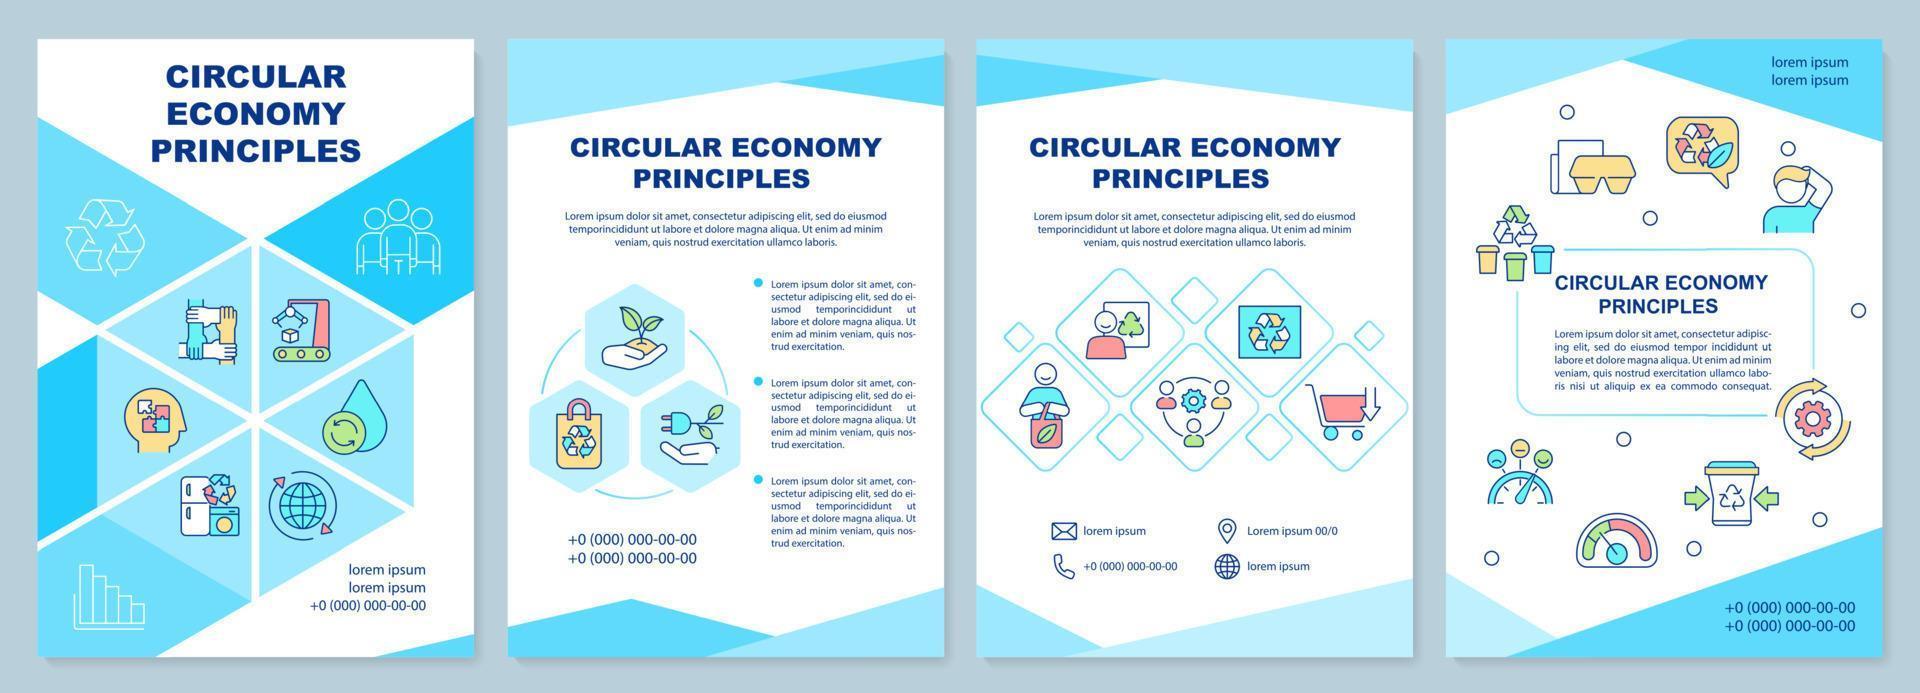 Circular economy principles turquoise brochure template. Sustainability. Leaflet design with linear icons. 4 vector layouts for presentation, annual reports.